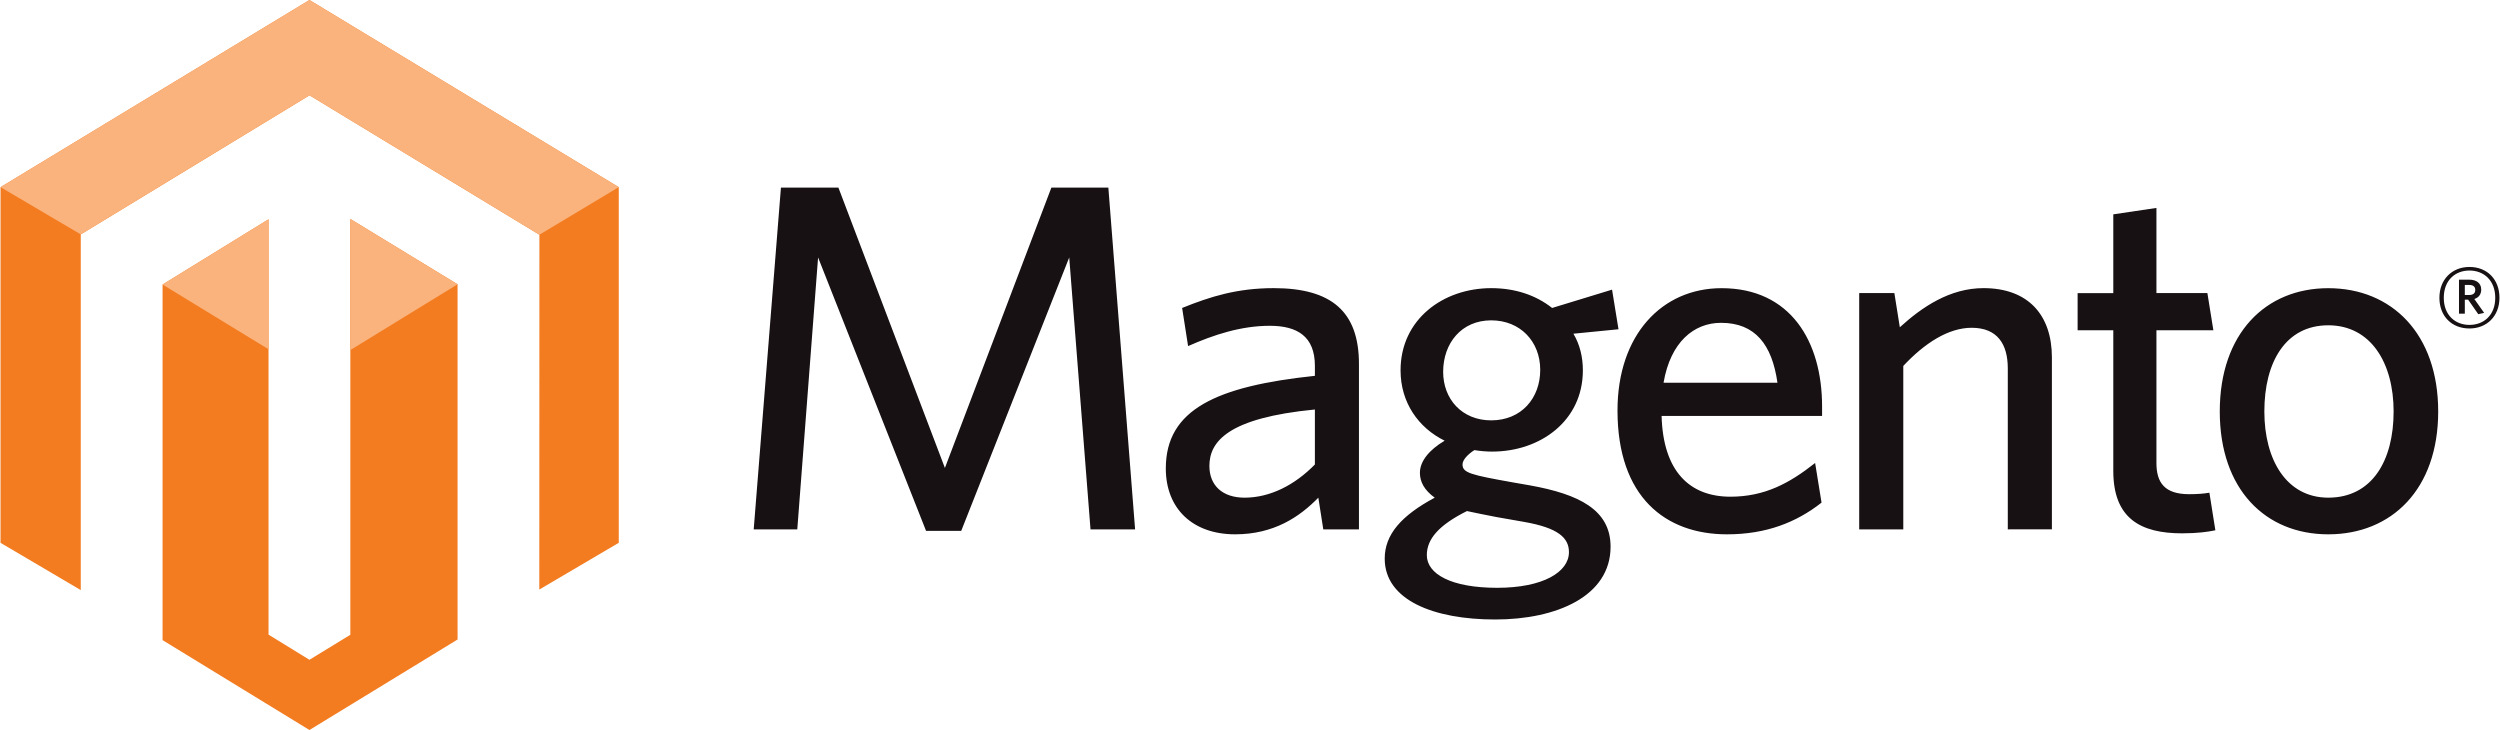 Magento Logo Png - Magento, Transparent background PNG HD thumbnail